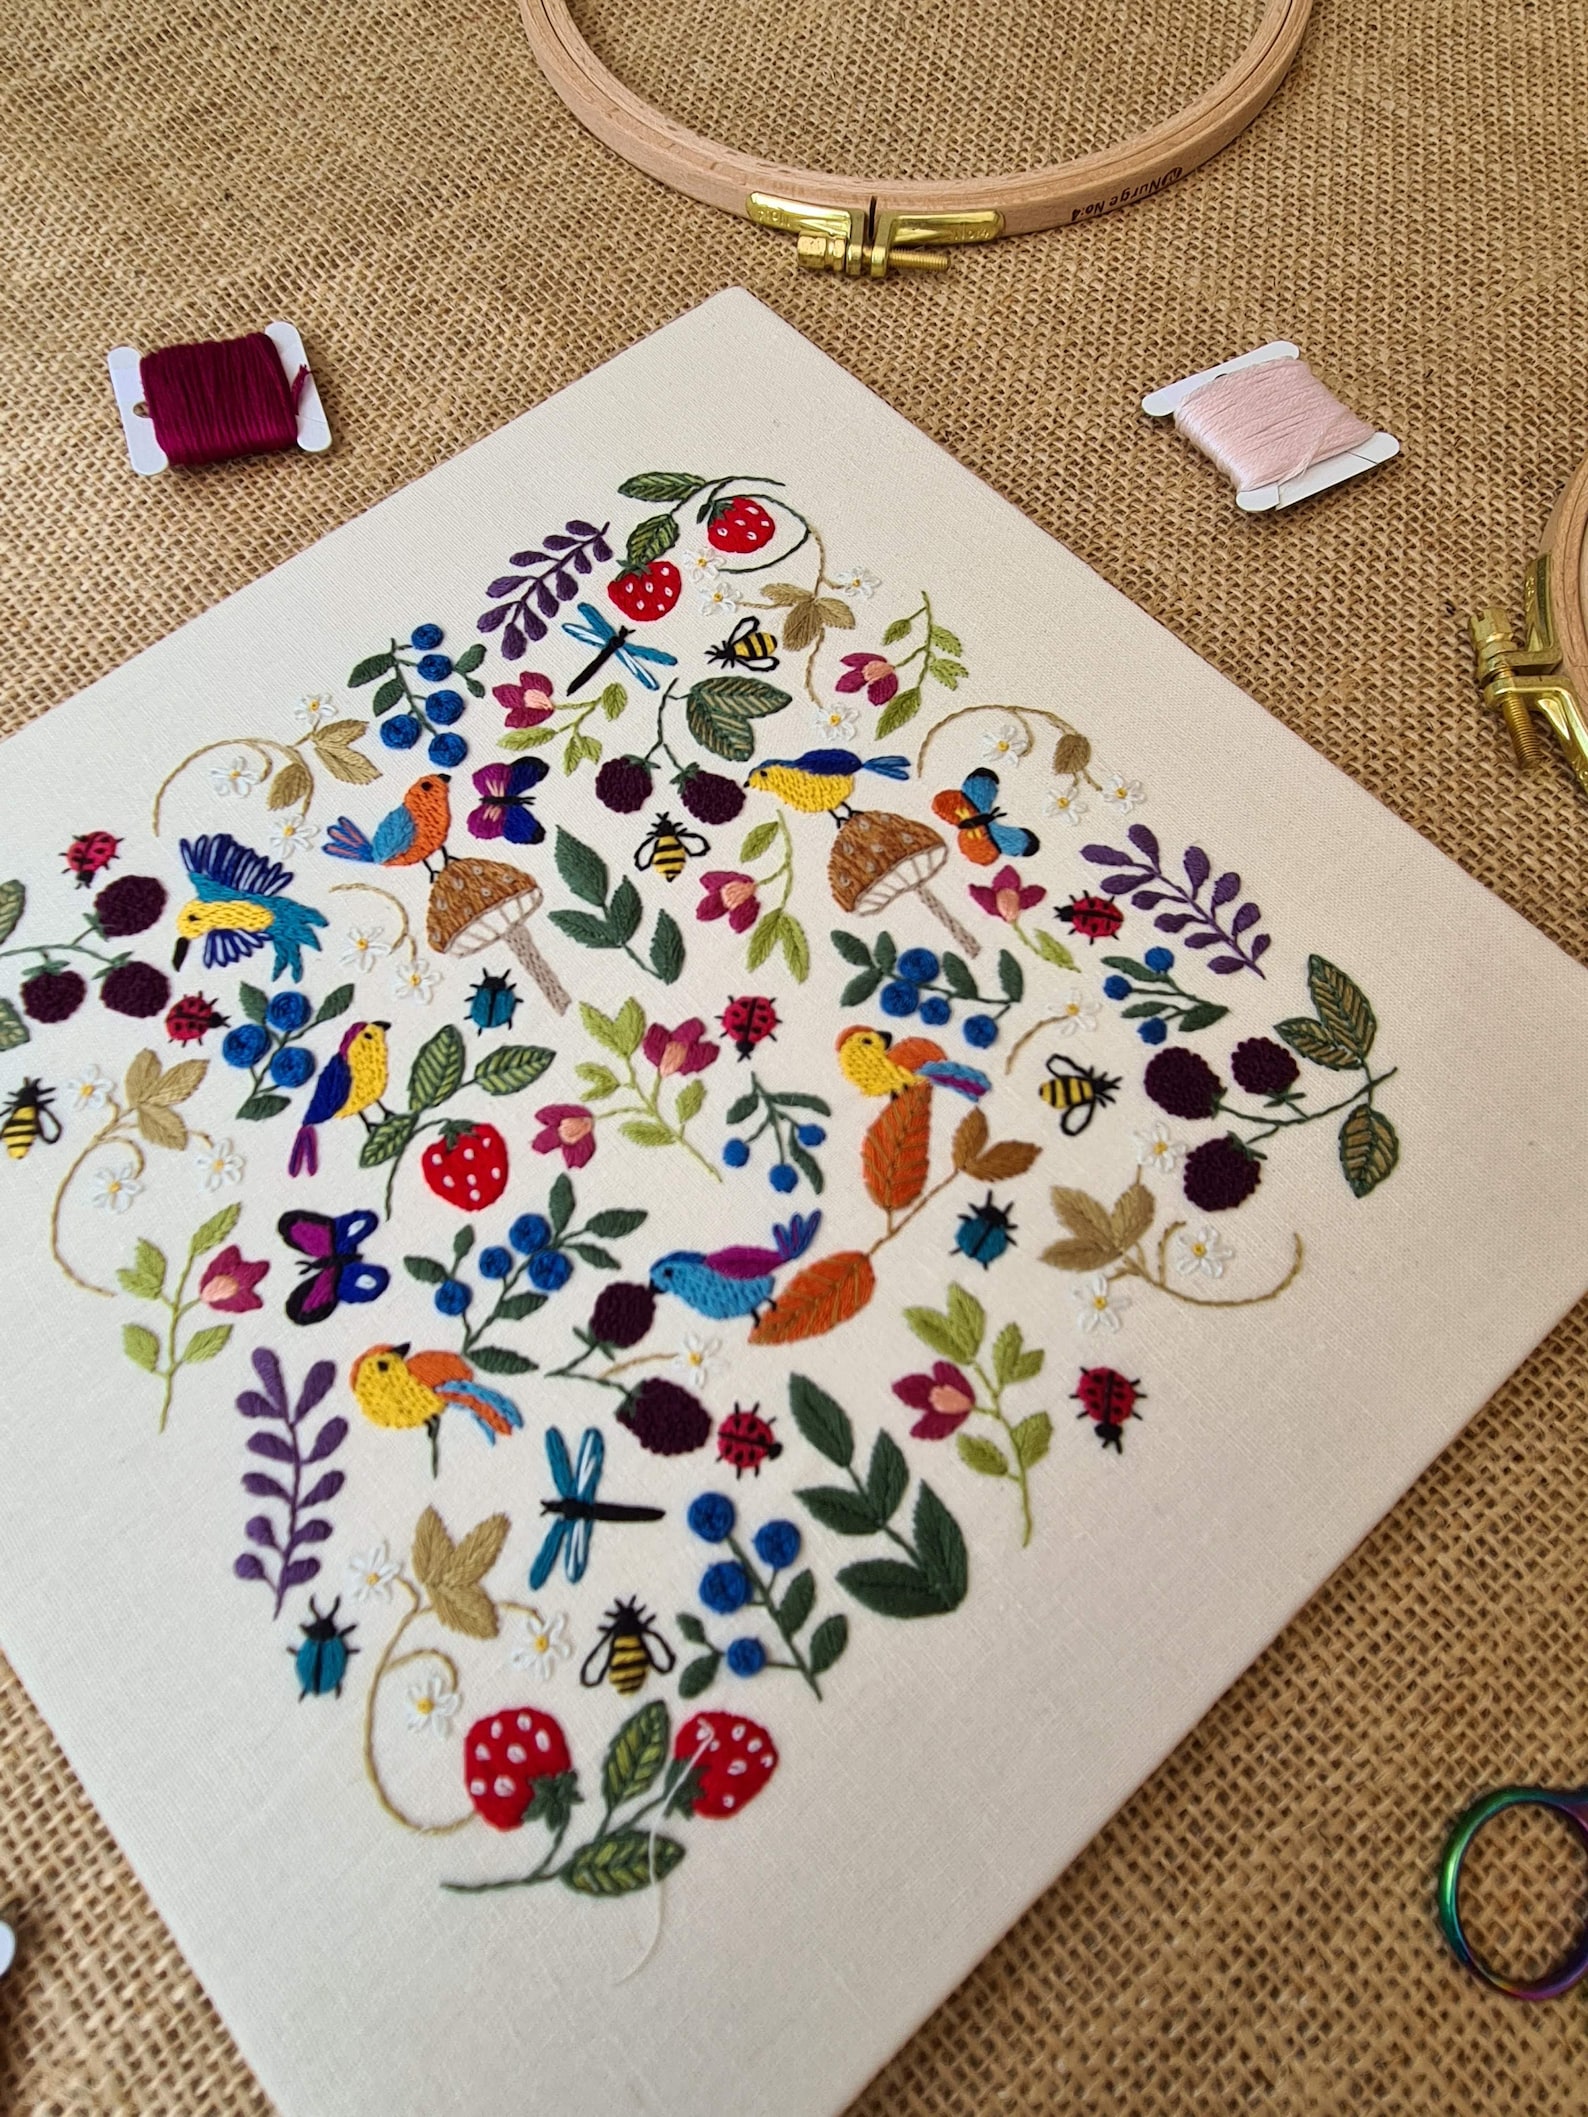 Birds Bugs and Berries Hand Embroidery Kit Pre Printed - Etsy